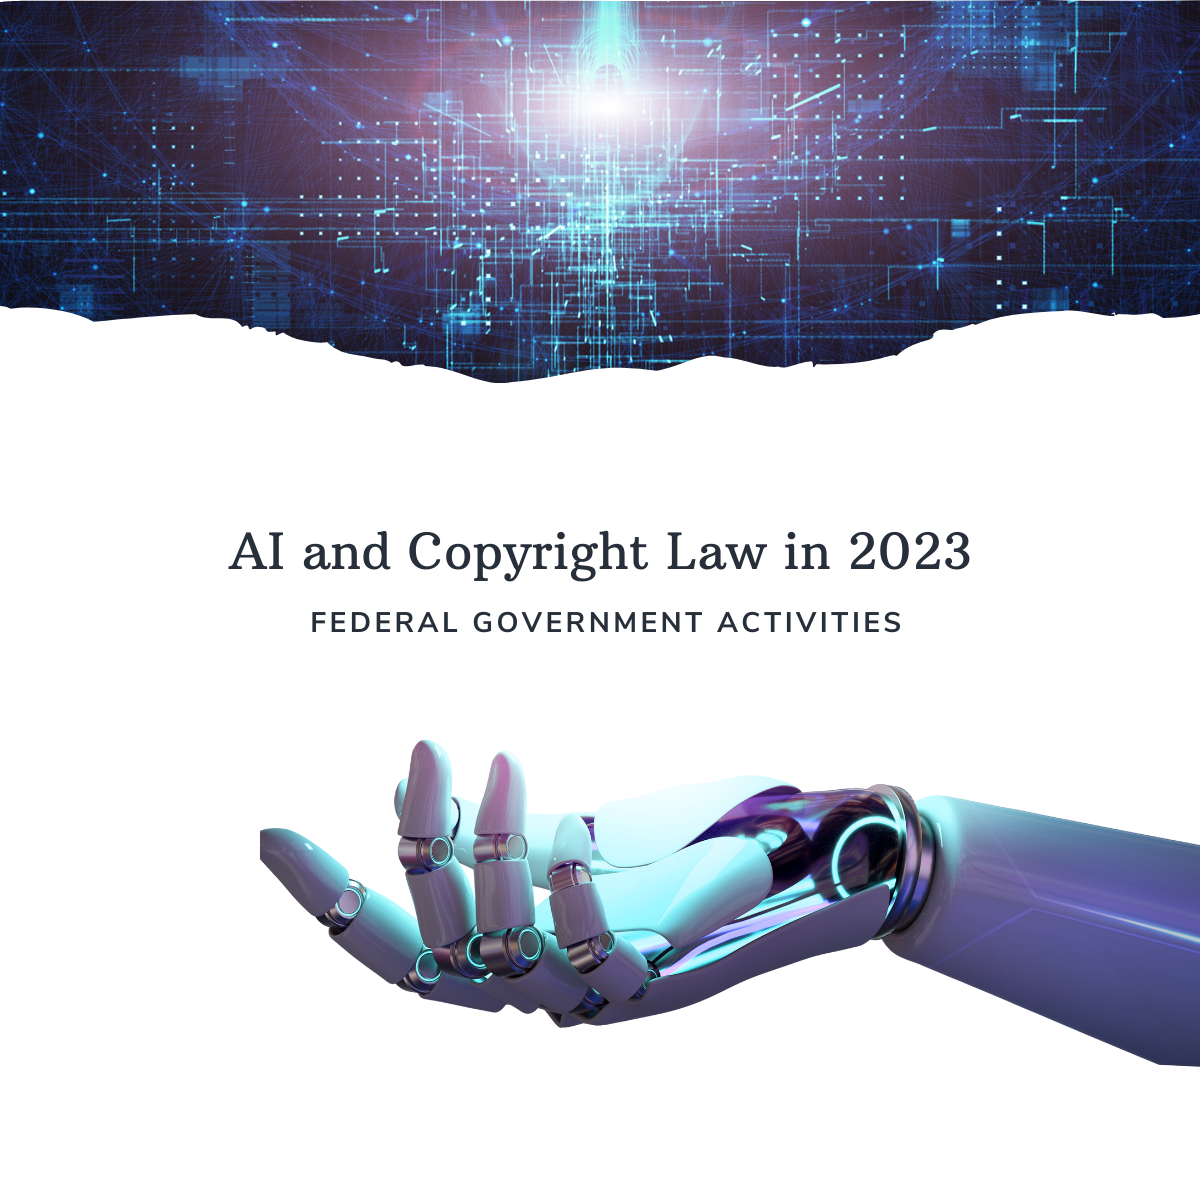 AI and Copyright Law in 2023: Federal Government Activities